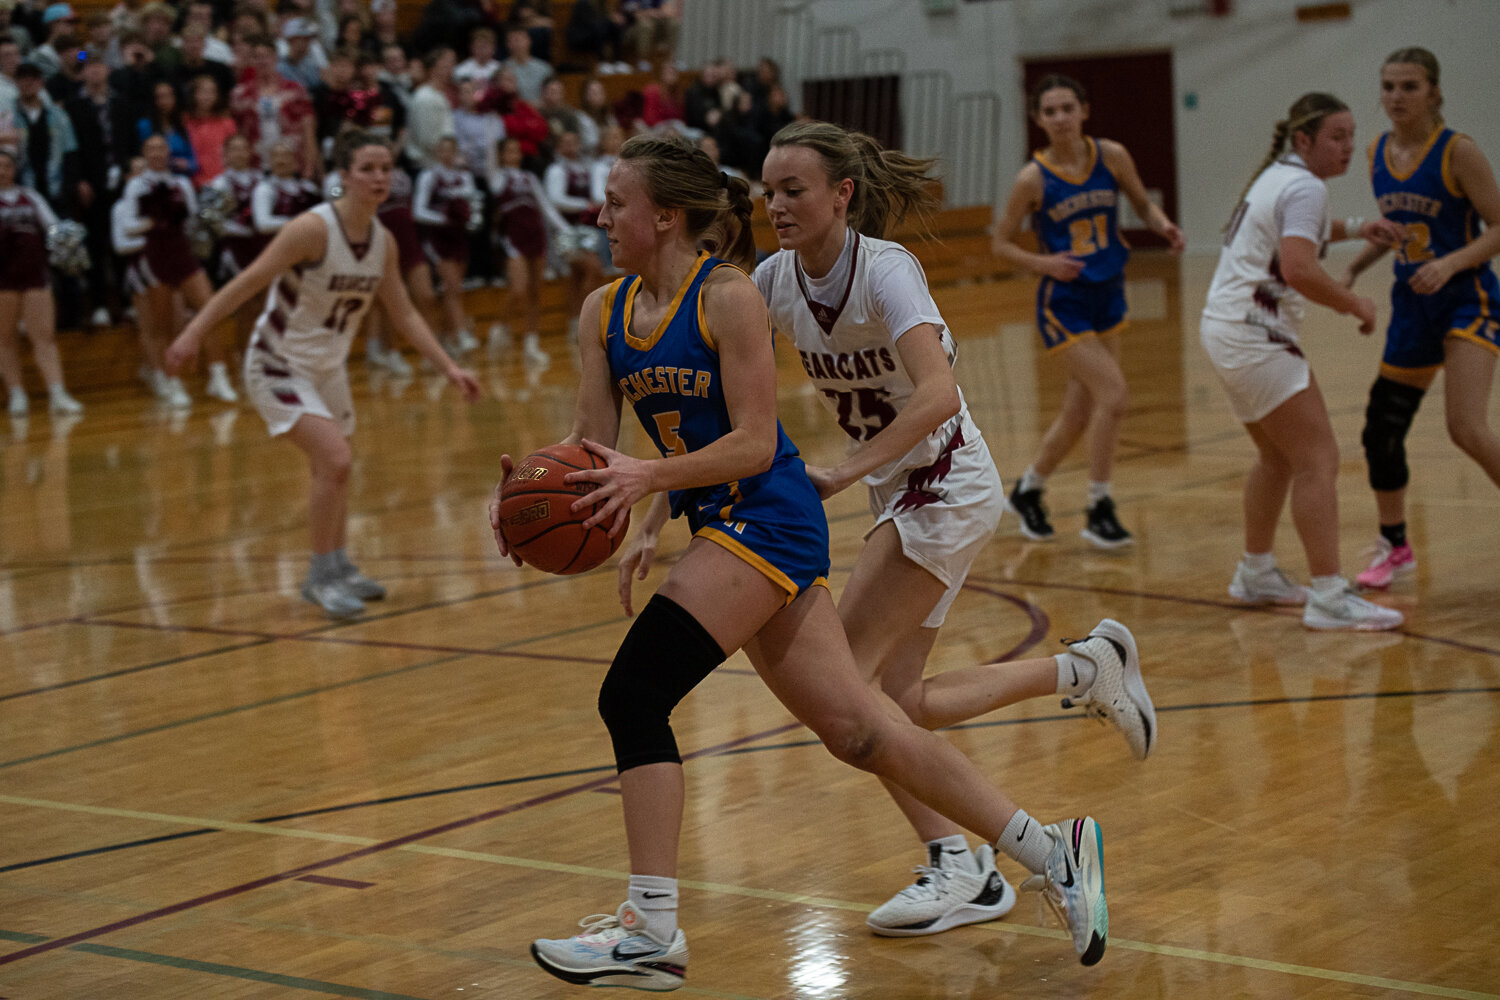 Grace Hoover drives towards the hoop during Rochester's loss at W.F. West on Dec. 6.